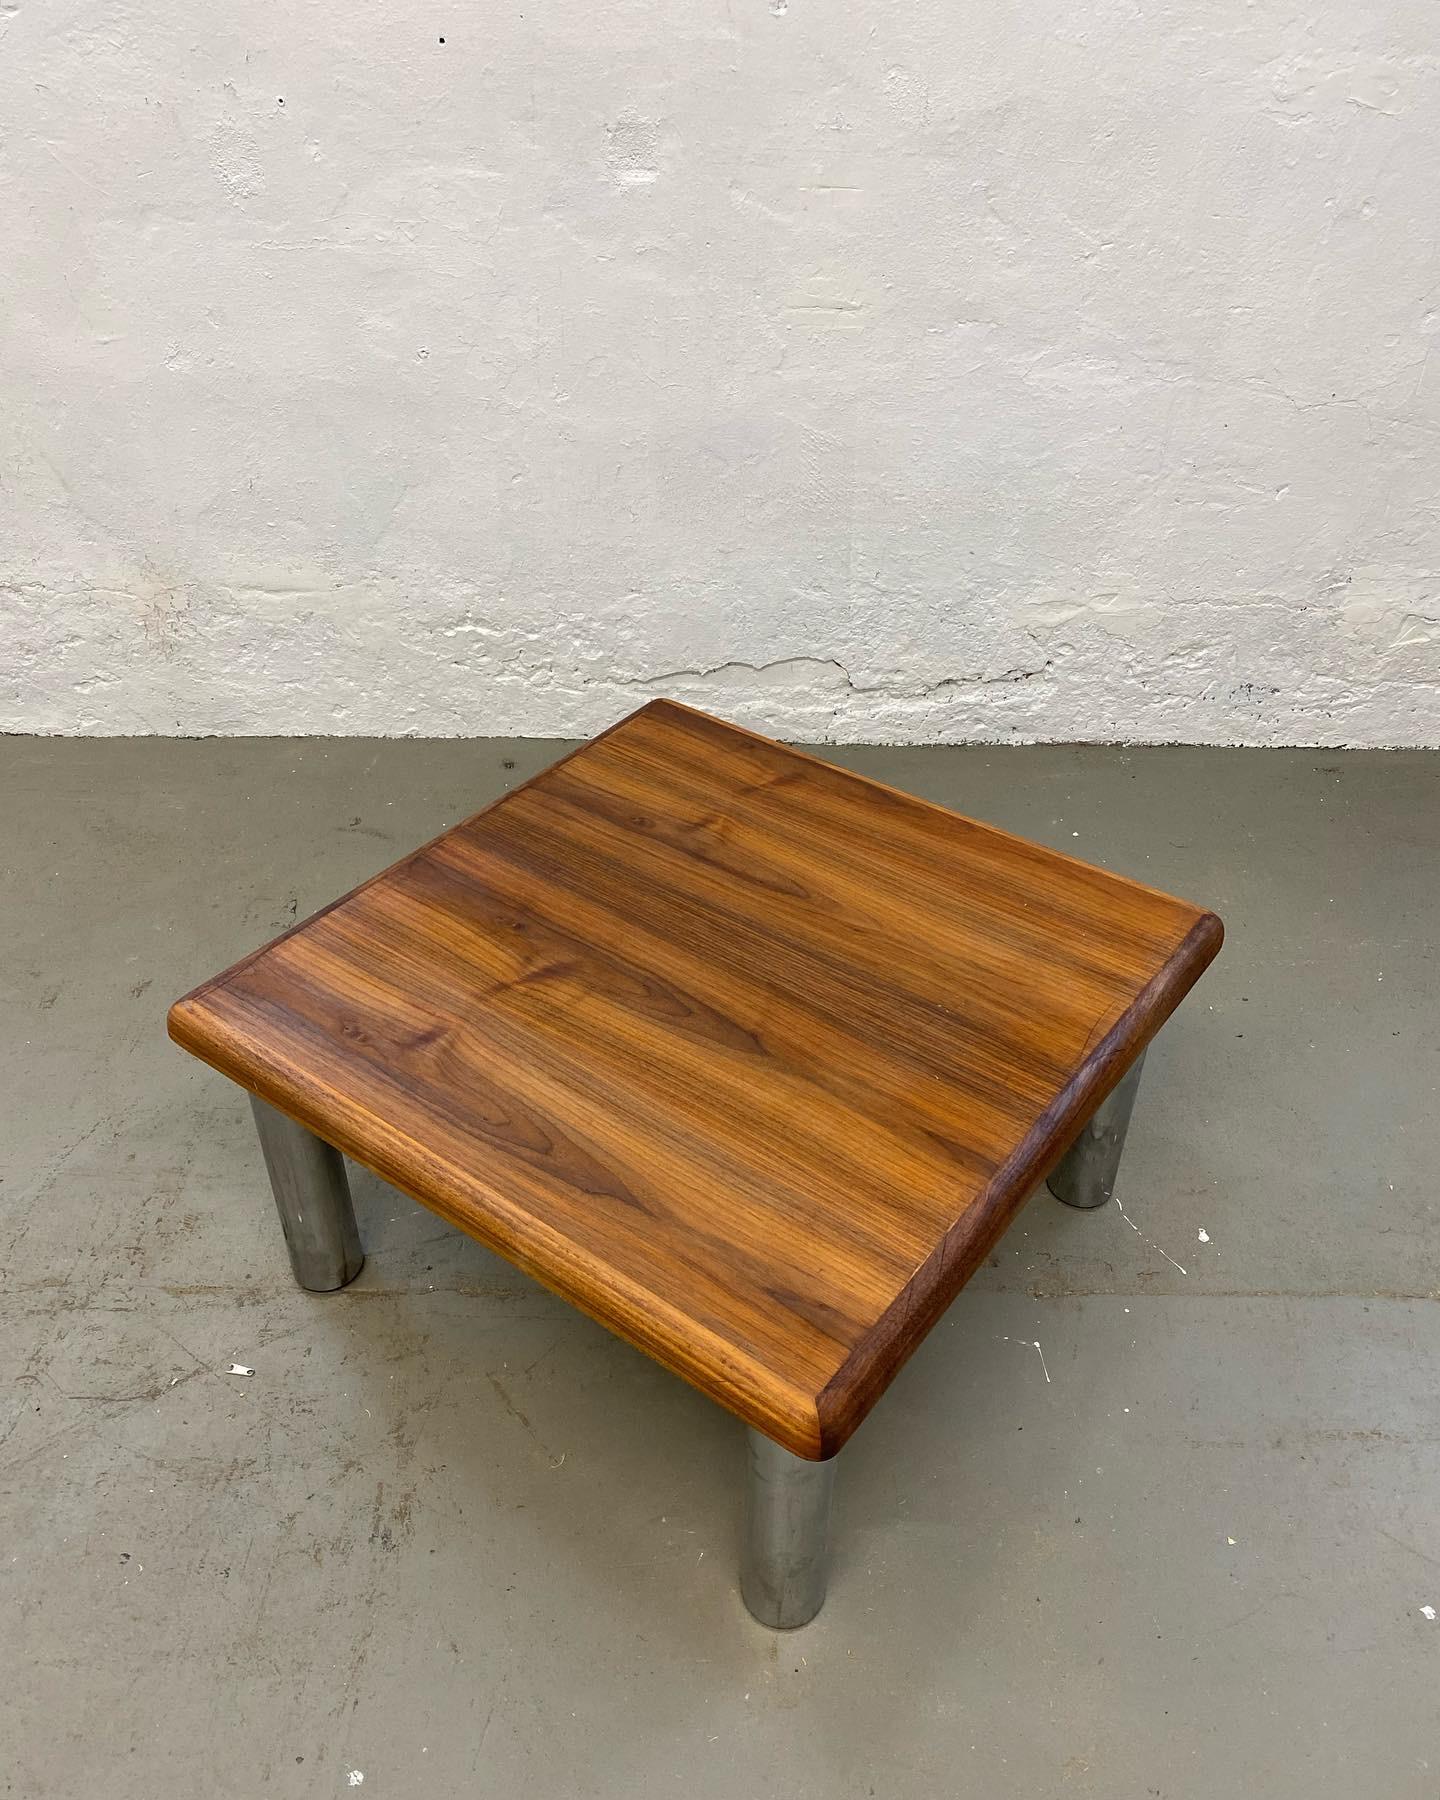 In the Style of Vladimir Kagan Unmarked. Modern square low table having an expressive Wood grained top with fat tubular Chromed legs. 13 tall x 28 x 28 Original vintage condition. Refer to images provided.